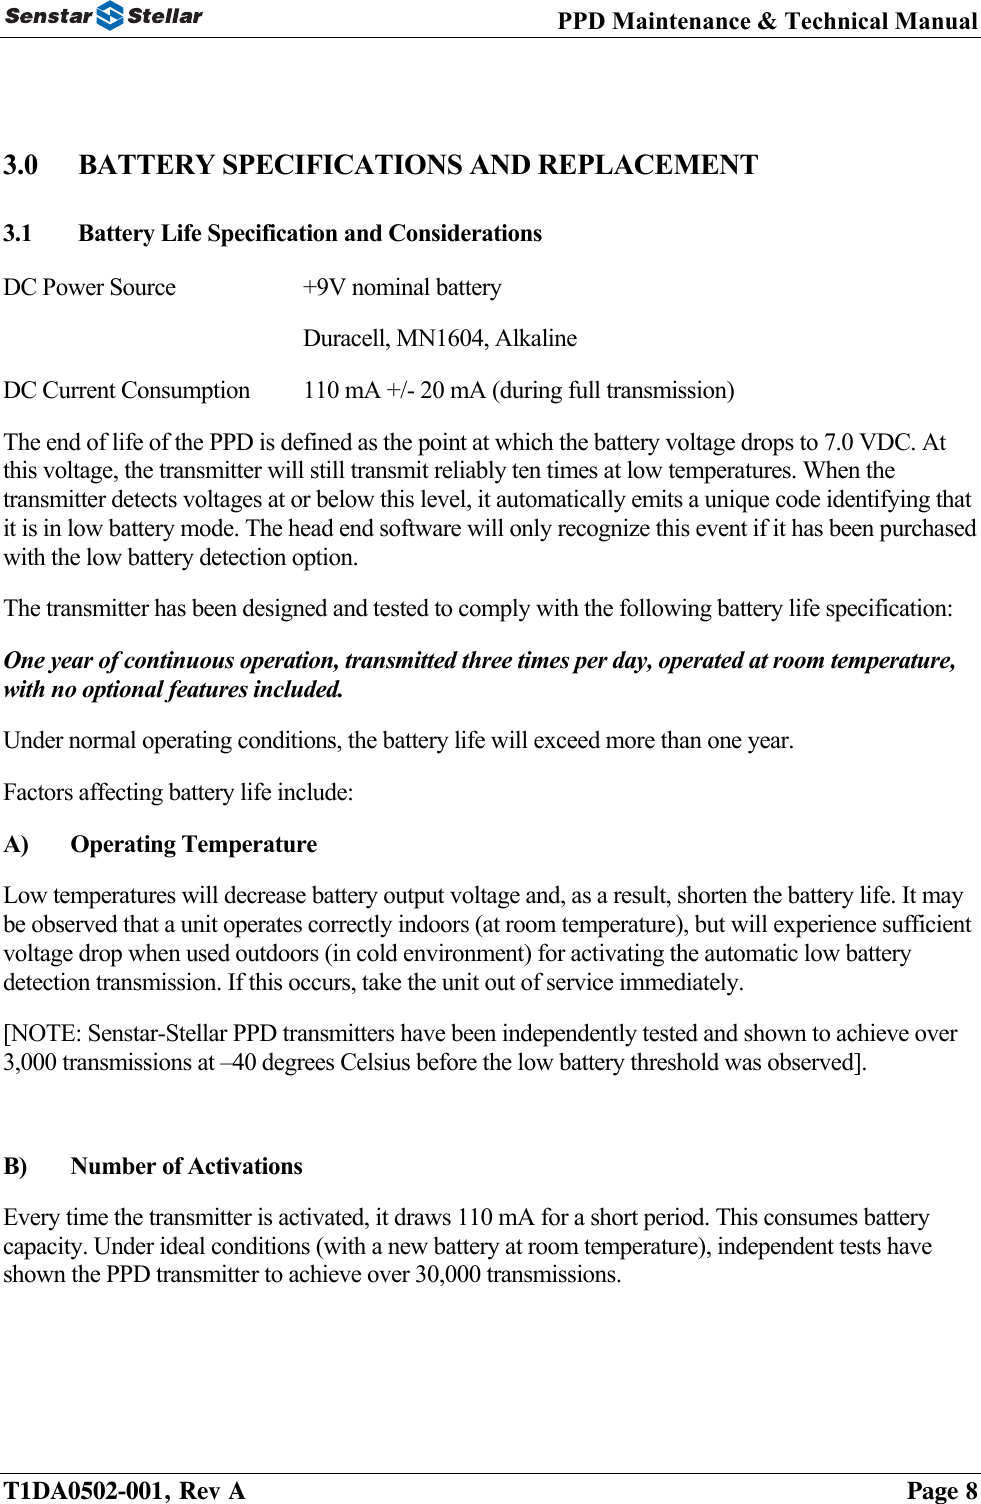 PPD Maintenance &amp; Technical Manual   3.0  BATTERY SPECIFICATIONS AND REPLACEMENT 3.1  Battery Life Specification and Considerations DC Power Source    +9V nominal battery     Duracell, MN1604, Alkaline DC Current Consumption  110 mA +/- 20 mA (during full transmission) The end of life of the PPD is defined as the point at which the battery voltage drops to 7.0 VDC. At this voltage, the transmitter will still transmit reliably ten times at low temperatures. When the transmitter detects voltages at or below this level, it automatically emits a unique code identifying that it is in low battery mode. The head end software will only recognize this event if it has been purchased with the low battery detection option. The transmitter has been designed and tested to comply with the following battery life specification: One year of continuous operation, transmitted three times per day, operated at room temperature, with no optional features included. Under normal operating conditions, the battery life will exceed more than one year. Factors affecting battery life include: A) Operating Temperature Low temperatures will decrease battery output voltage and, as a result, shorten the battery life. It may be observed that a unit operates correctly indoors (at room temperature), but will experience sufficient voltage drop when used outdoors (in cold environment) for activating the automatic low battery detection transmission. If this occurs, take the unit out of service immediately. [NOTE: Senstar-Stellar PPD transmitters have been independently tested and shown to achieve over 3,000 transmissions at –40 degrees Celsius before the low battery threshold was observed].  B) Number of Activations Every time the transmitter is activated, it draws 110 mA for a short period. This consumes battery capacity. Under ideal conditions (with a new battery at room temperature), independent tests have shown the PPD transmitter to achieve over 30,000 transmissions.  T1DA0502-001, Rev A    Page 8 